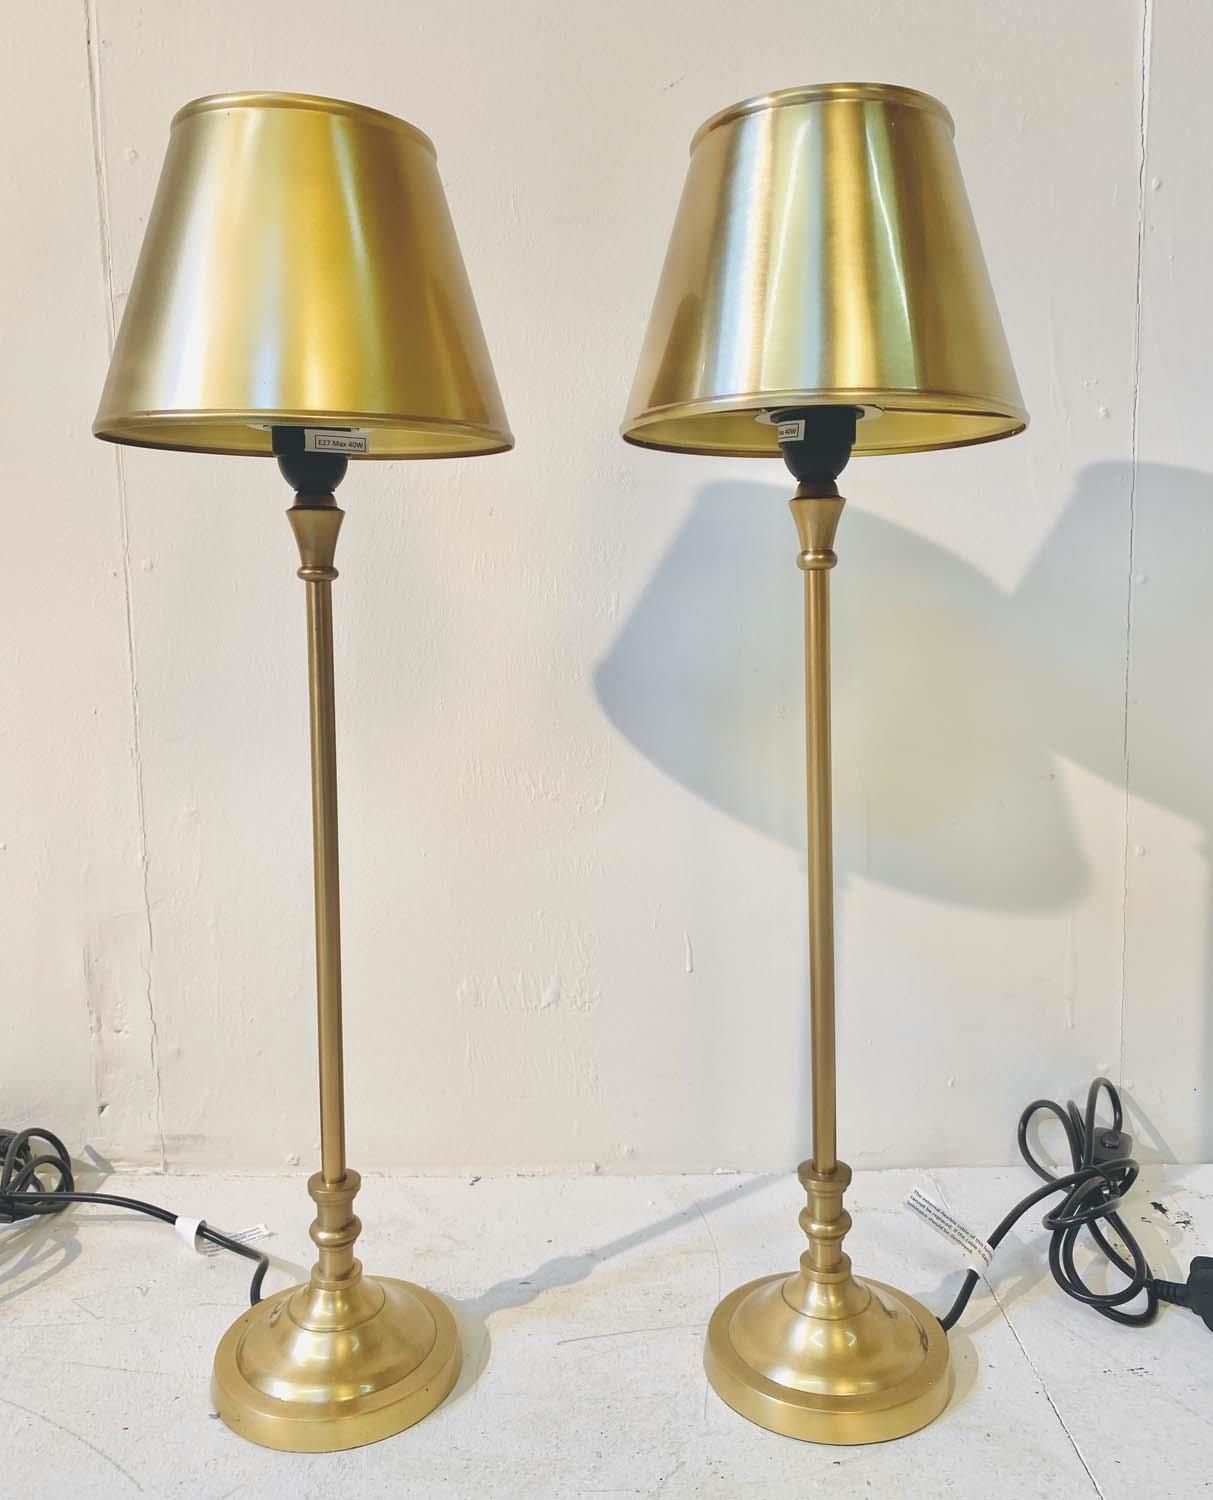 LIBRARY TABLE LAMPS, a pair, 64cm H x 20cm diam., with shades. (2)